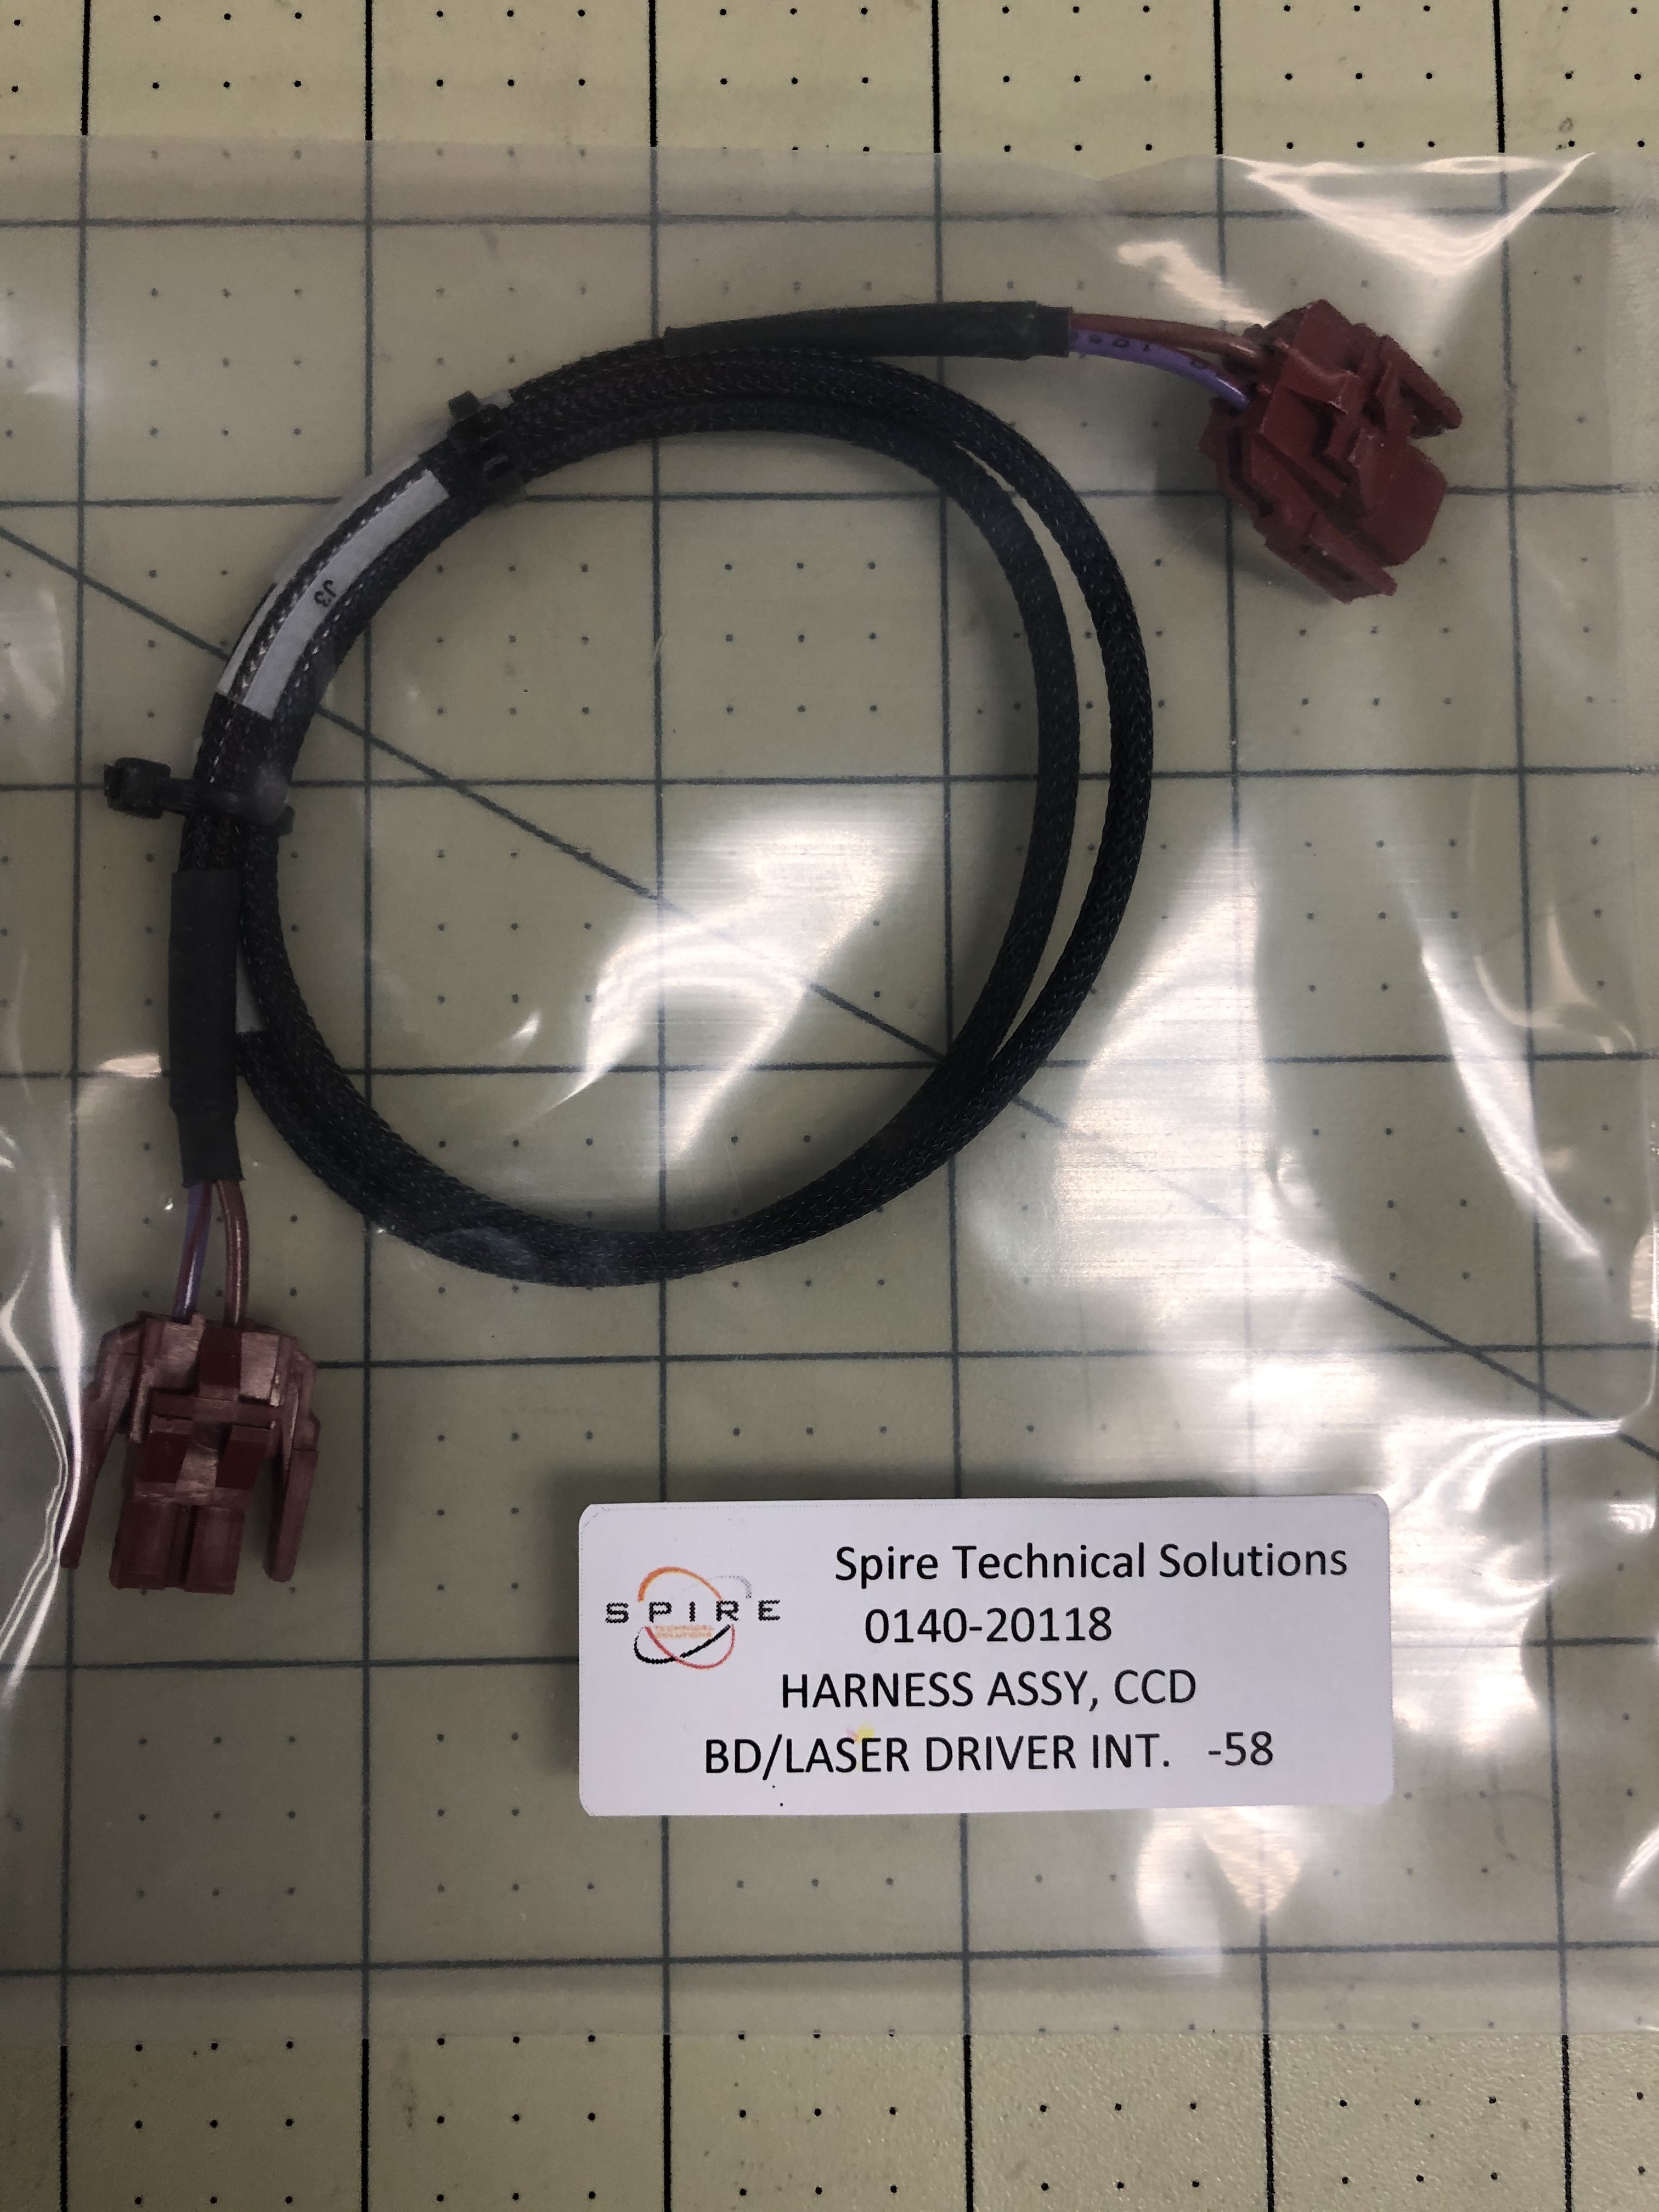 HARNESS ASSY, CCD BD/LASER DRIVER INT.